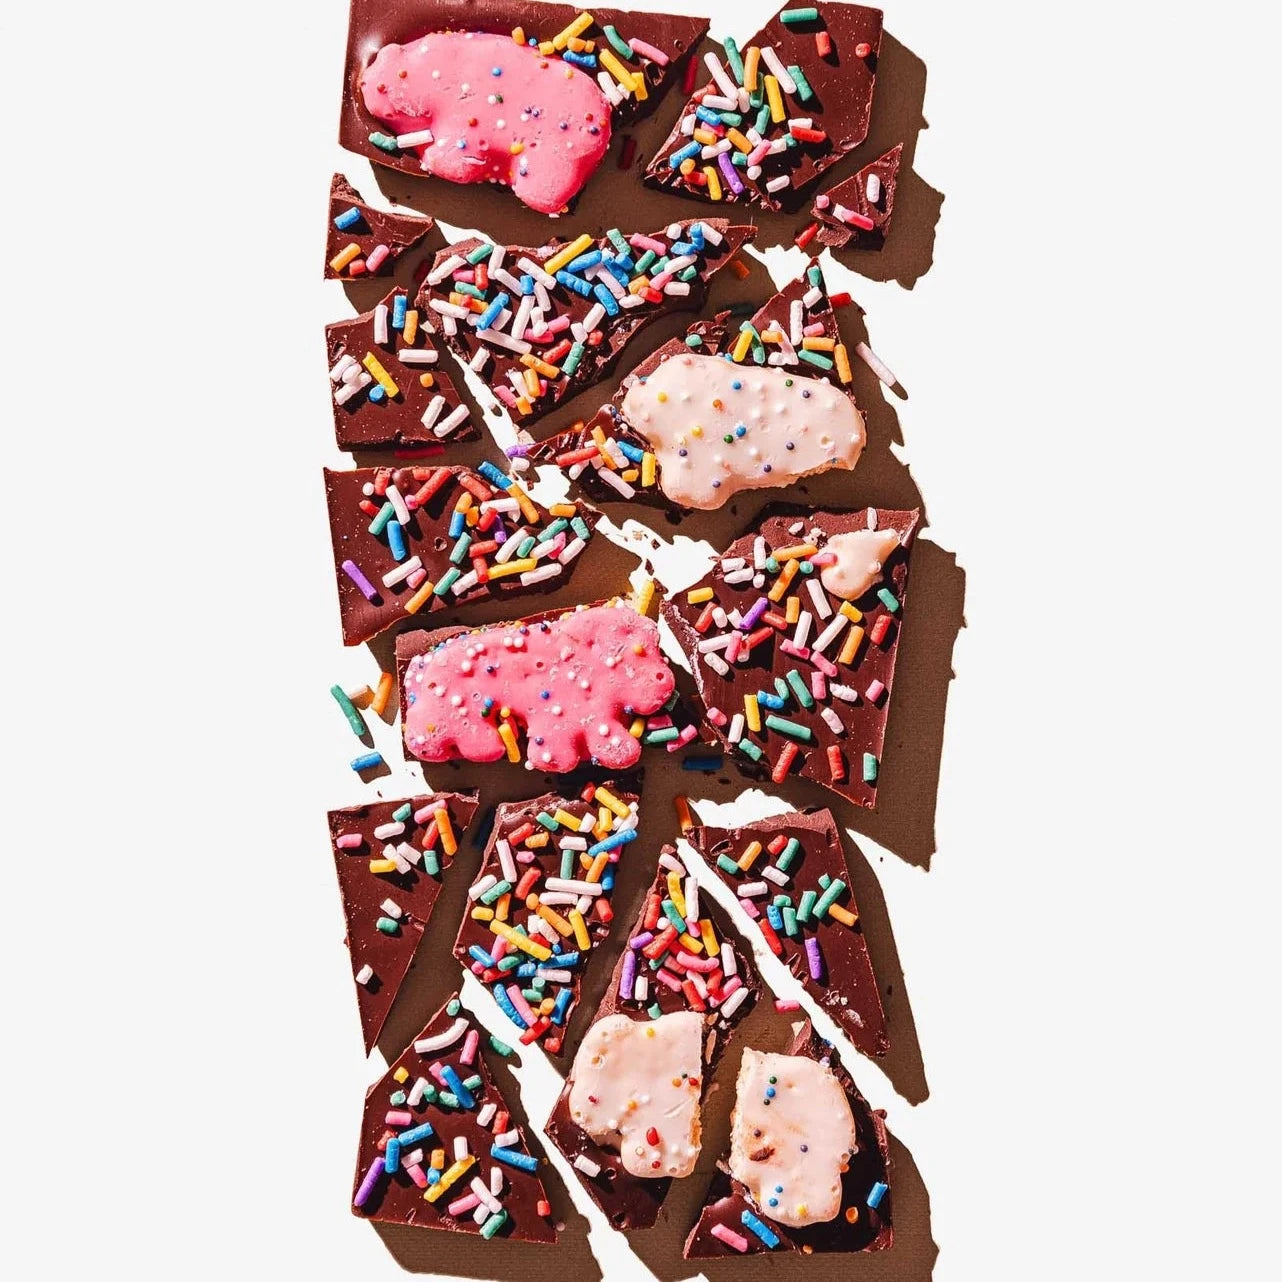 broken up chocolate bar with sprinkles and animal cookies throughout 